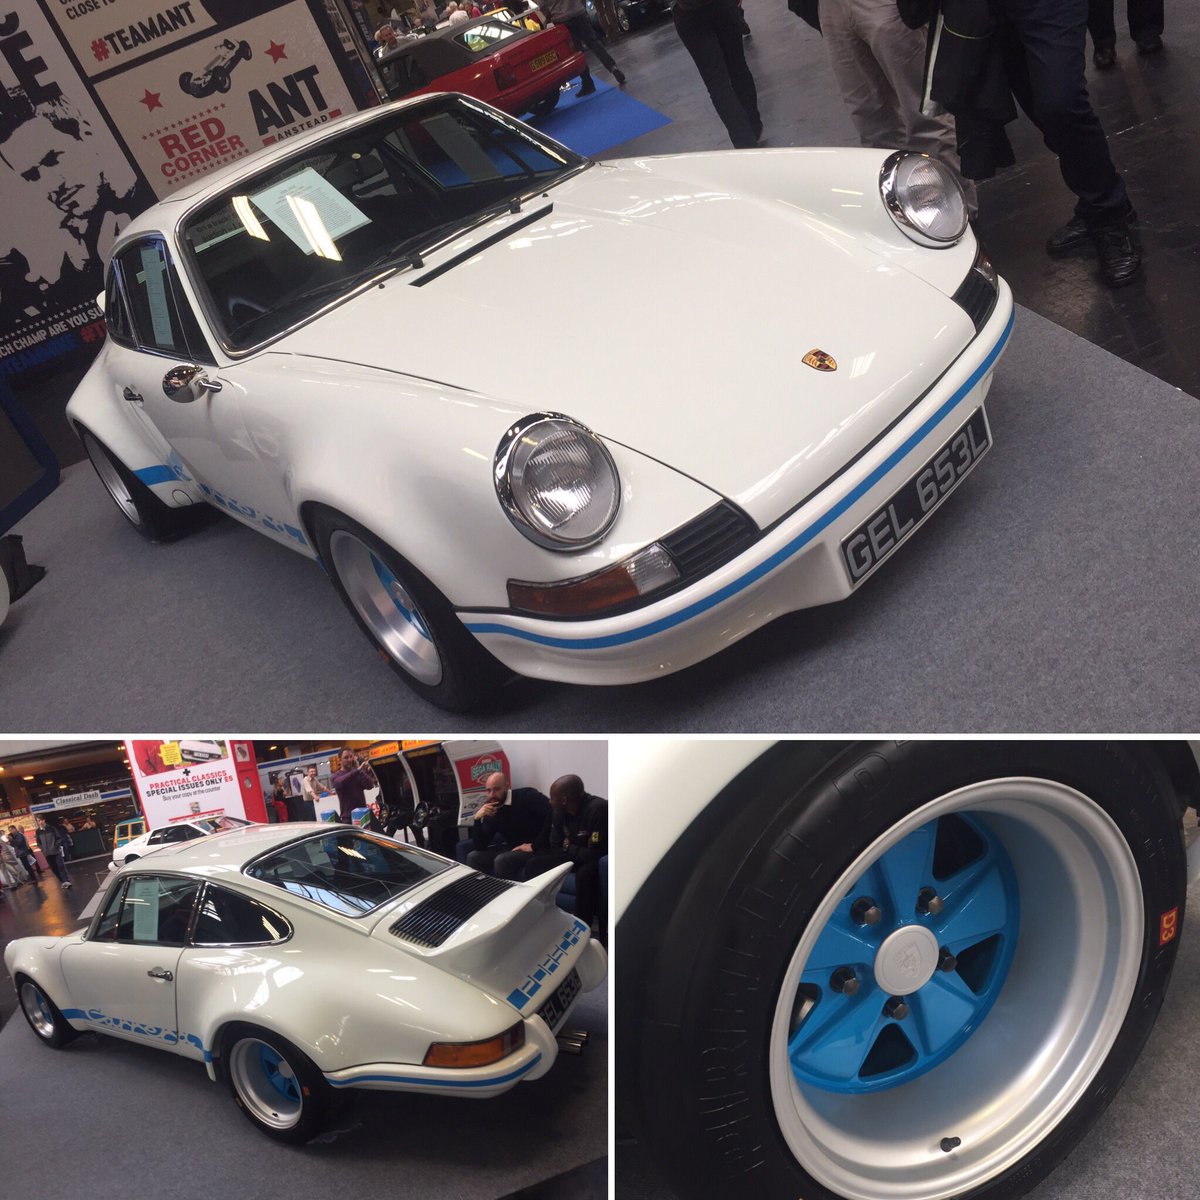 Porsche Highlights from the Classic Car & Restoration Show at the NEC 3.2 RSR backdate @Pro9Porsche #pro9porsche #rsr #porsche #911backdate